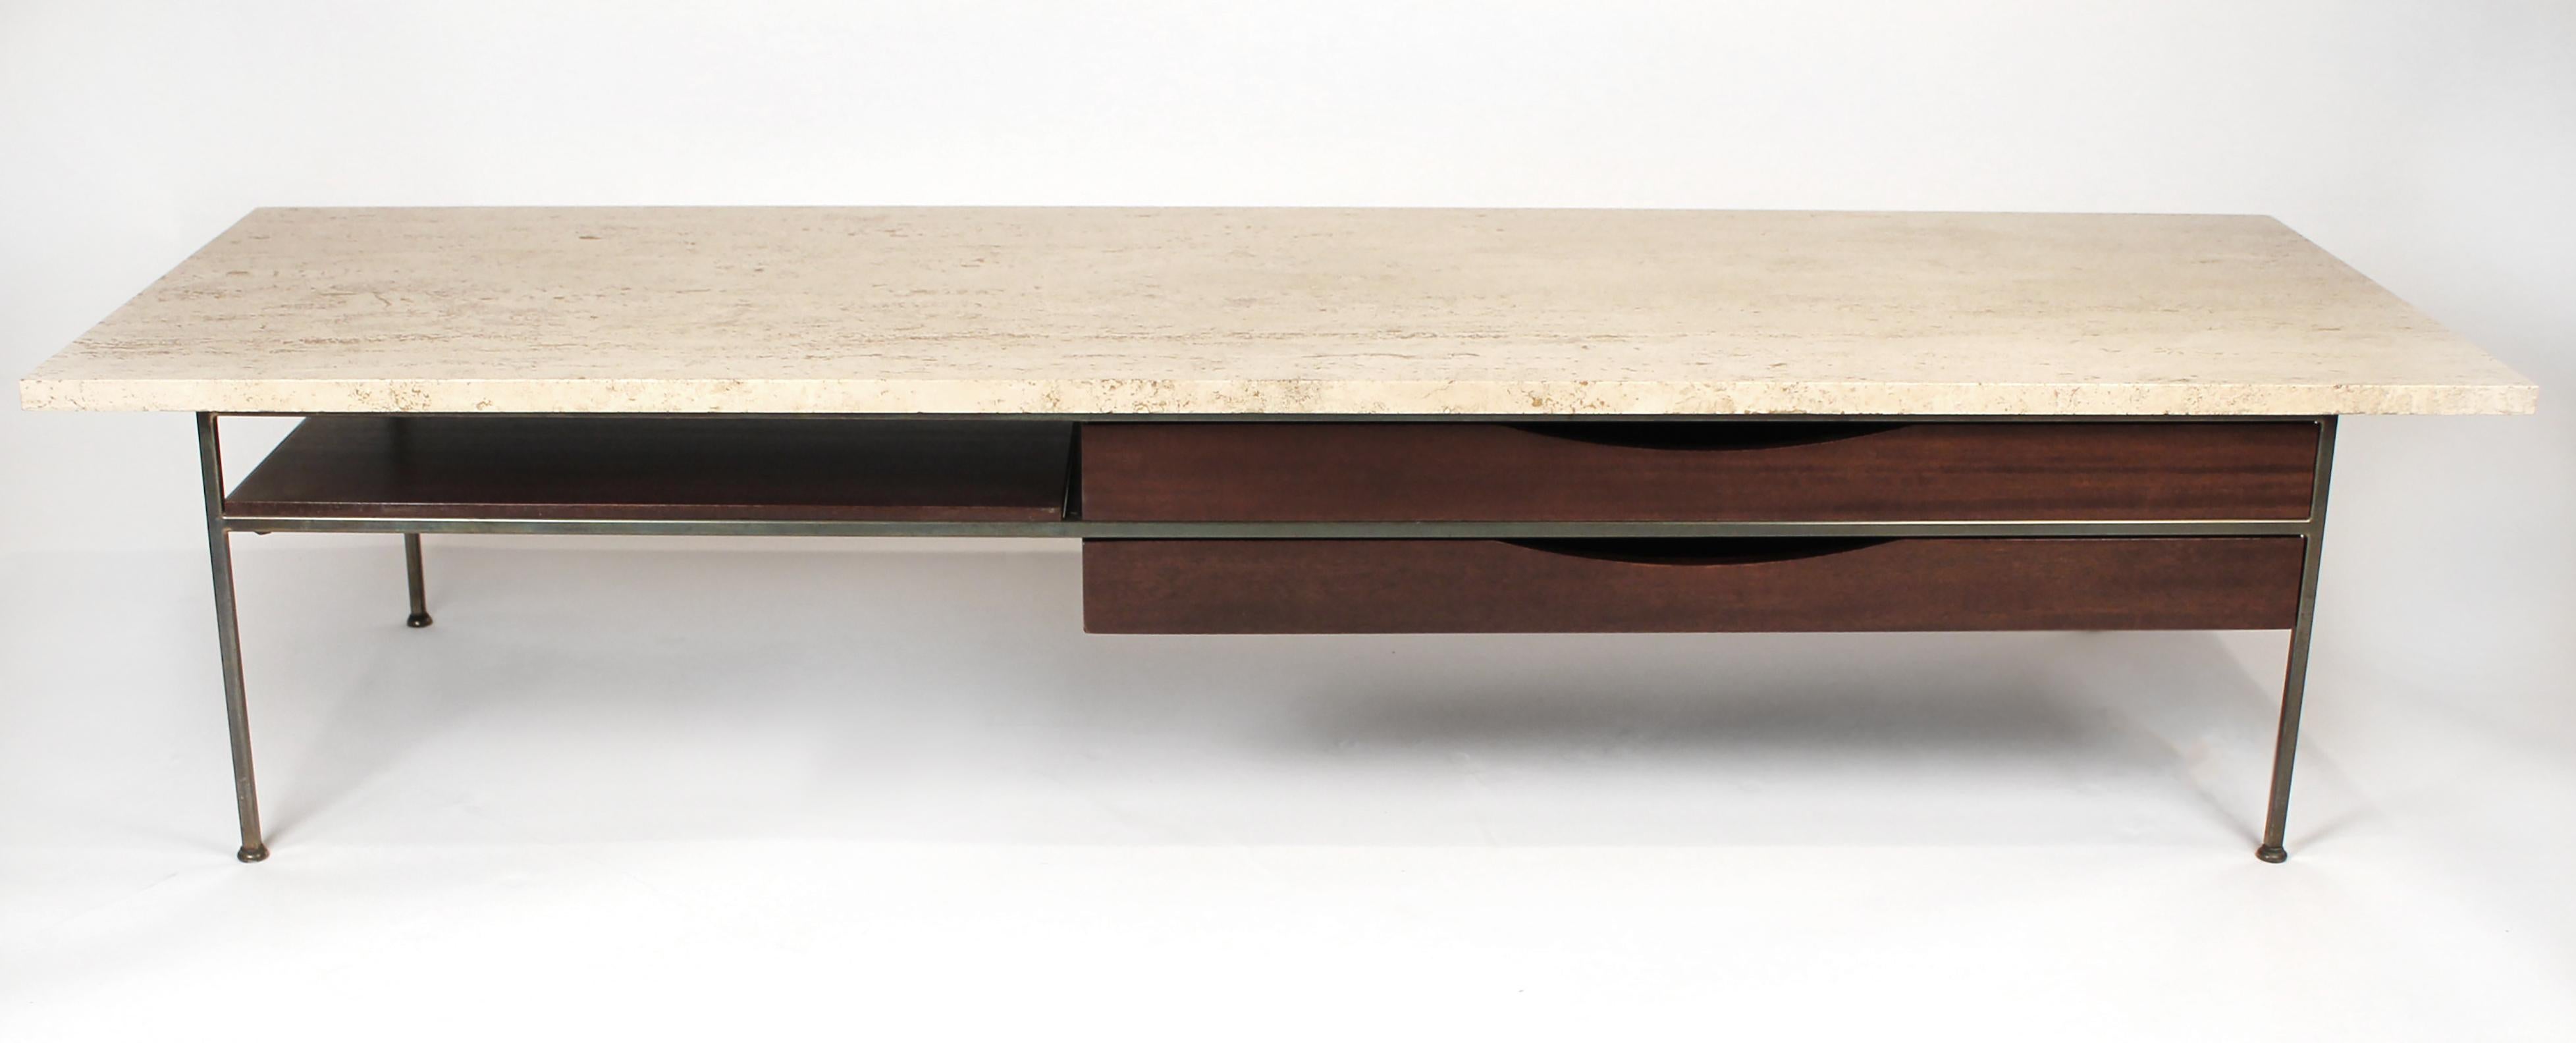 Mid-Century Modern Coffee Table, Irwin Collection by Paul McCobb for Calvin